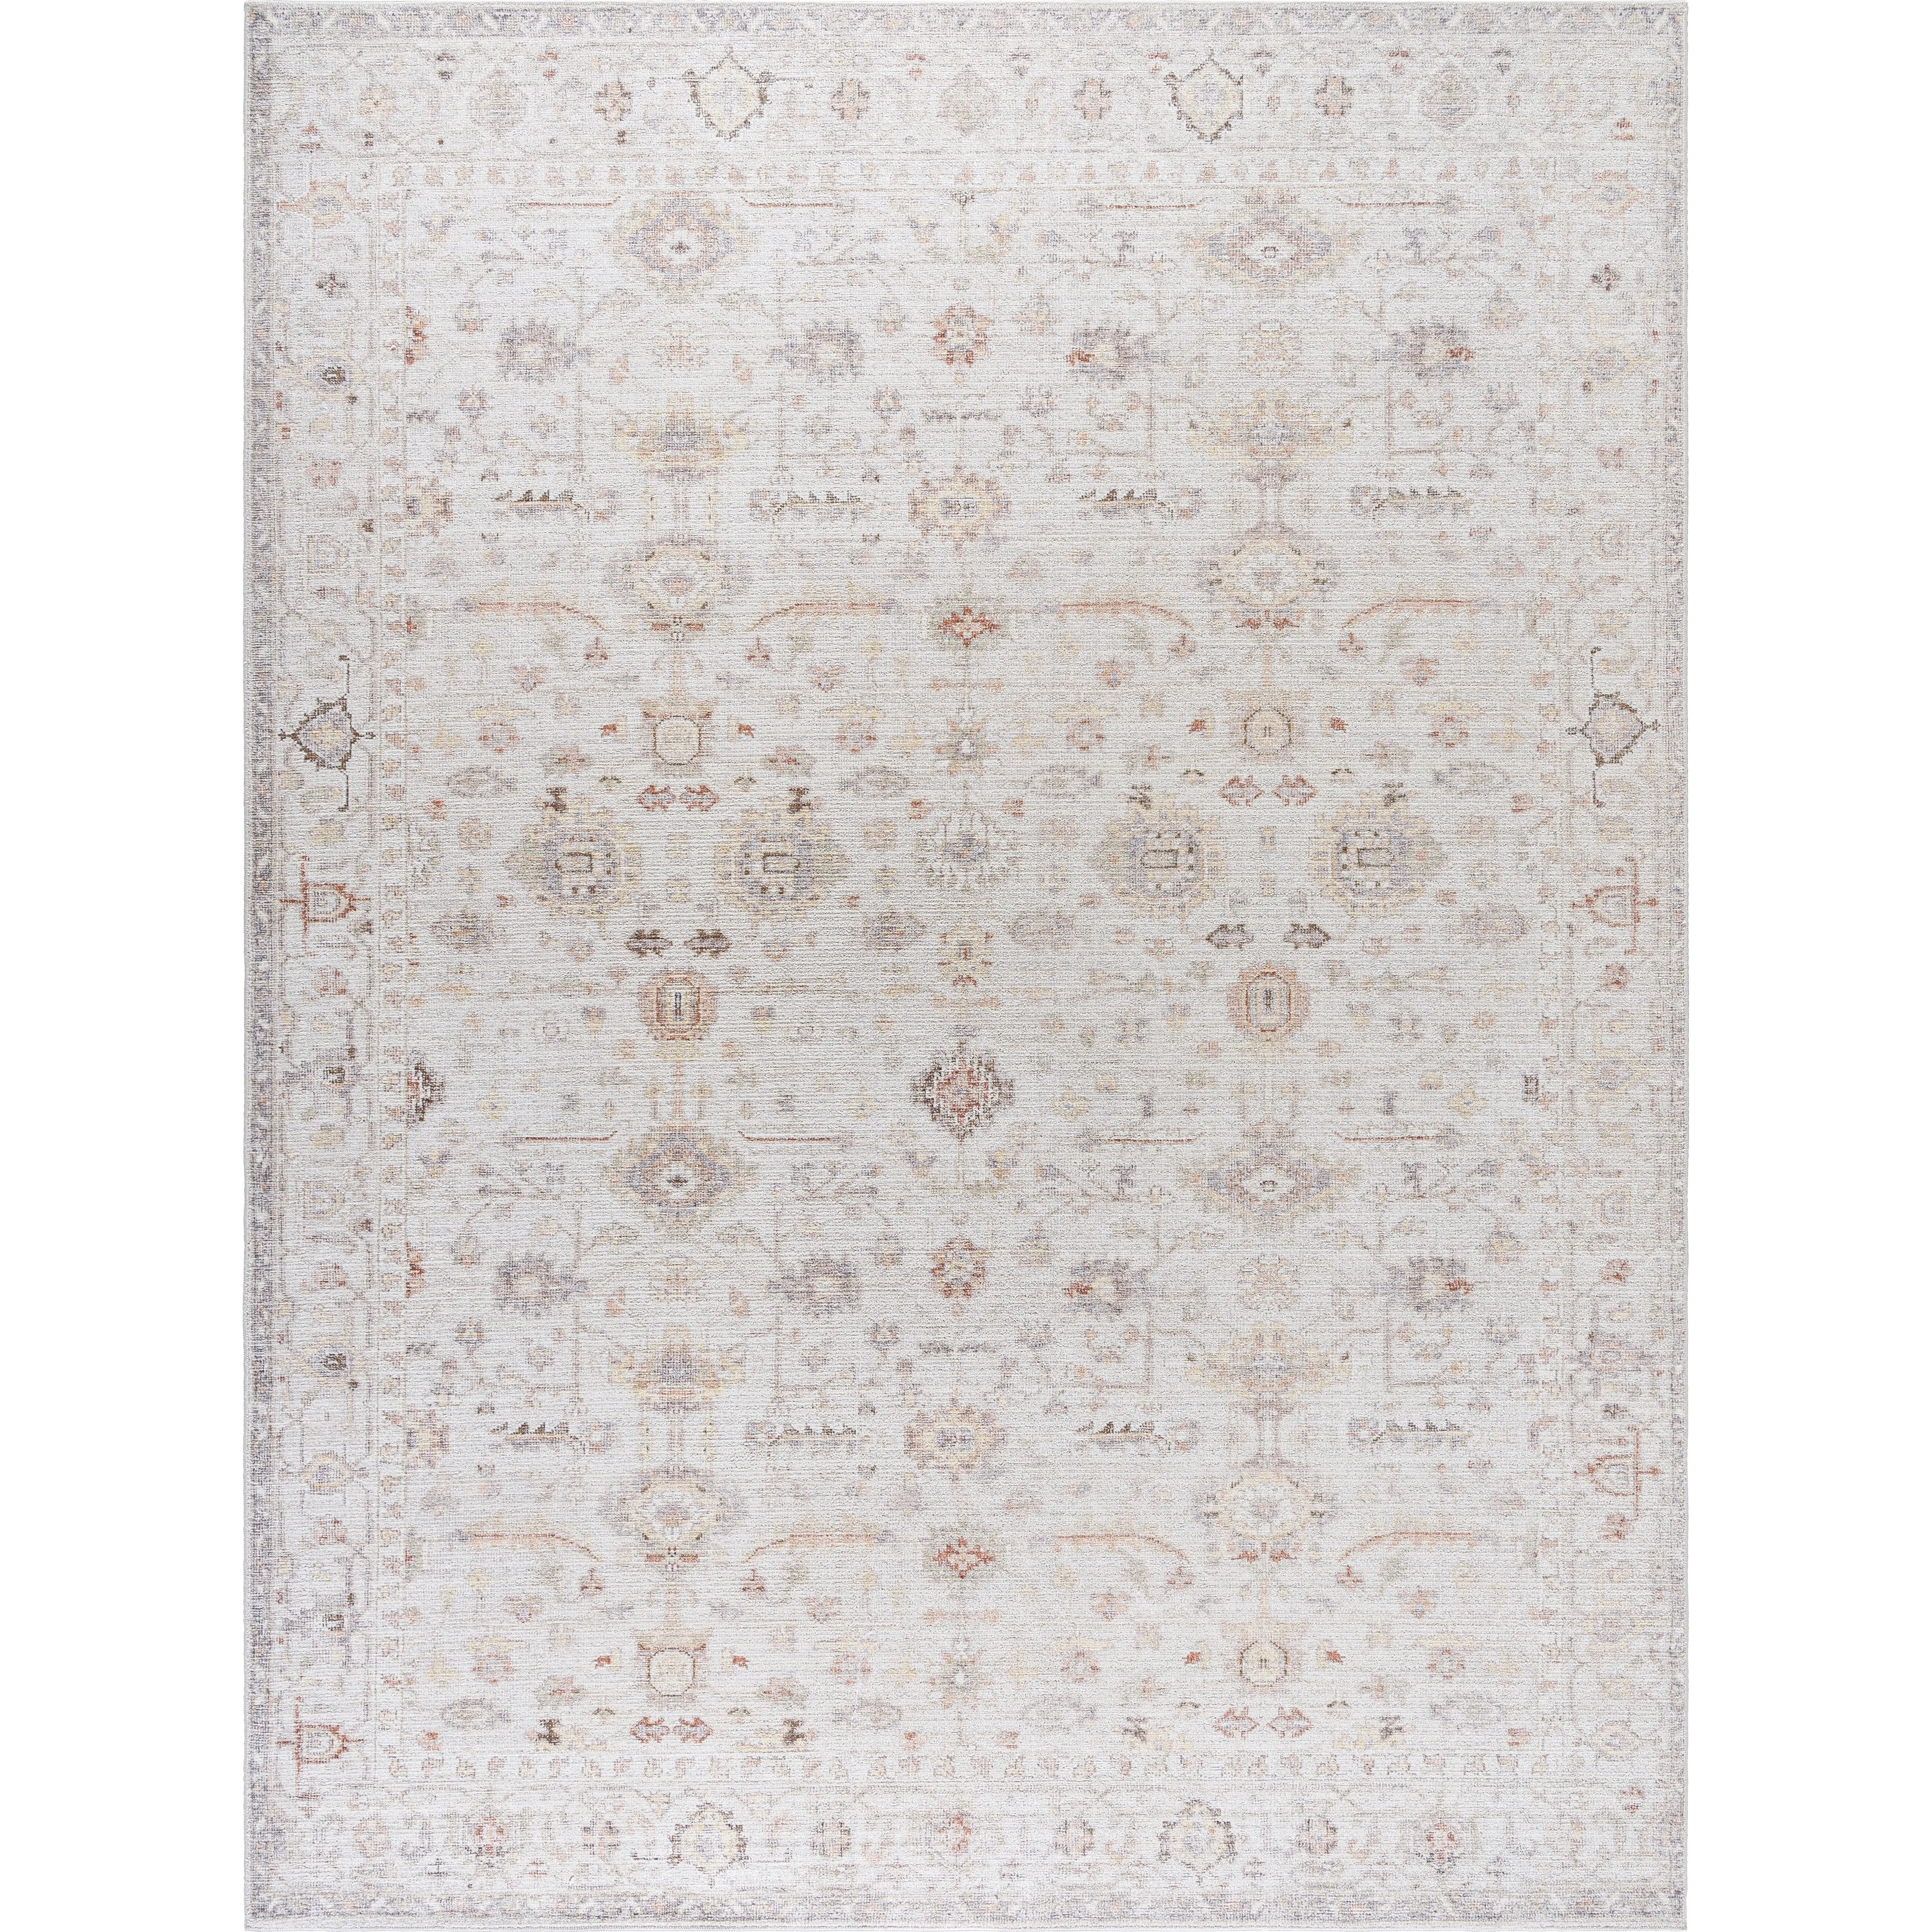 PNW Home x Surya available at Amethyst Home shipping to Australia, UK, and Canada. Organic modern design with easy to clean rugs for a family home in  the Charlotte metro area.